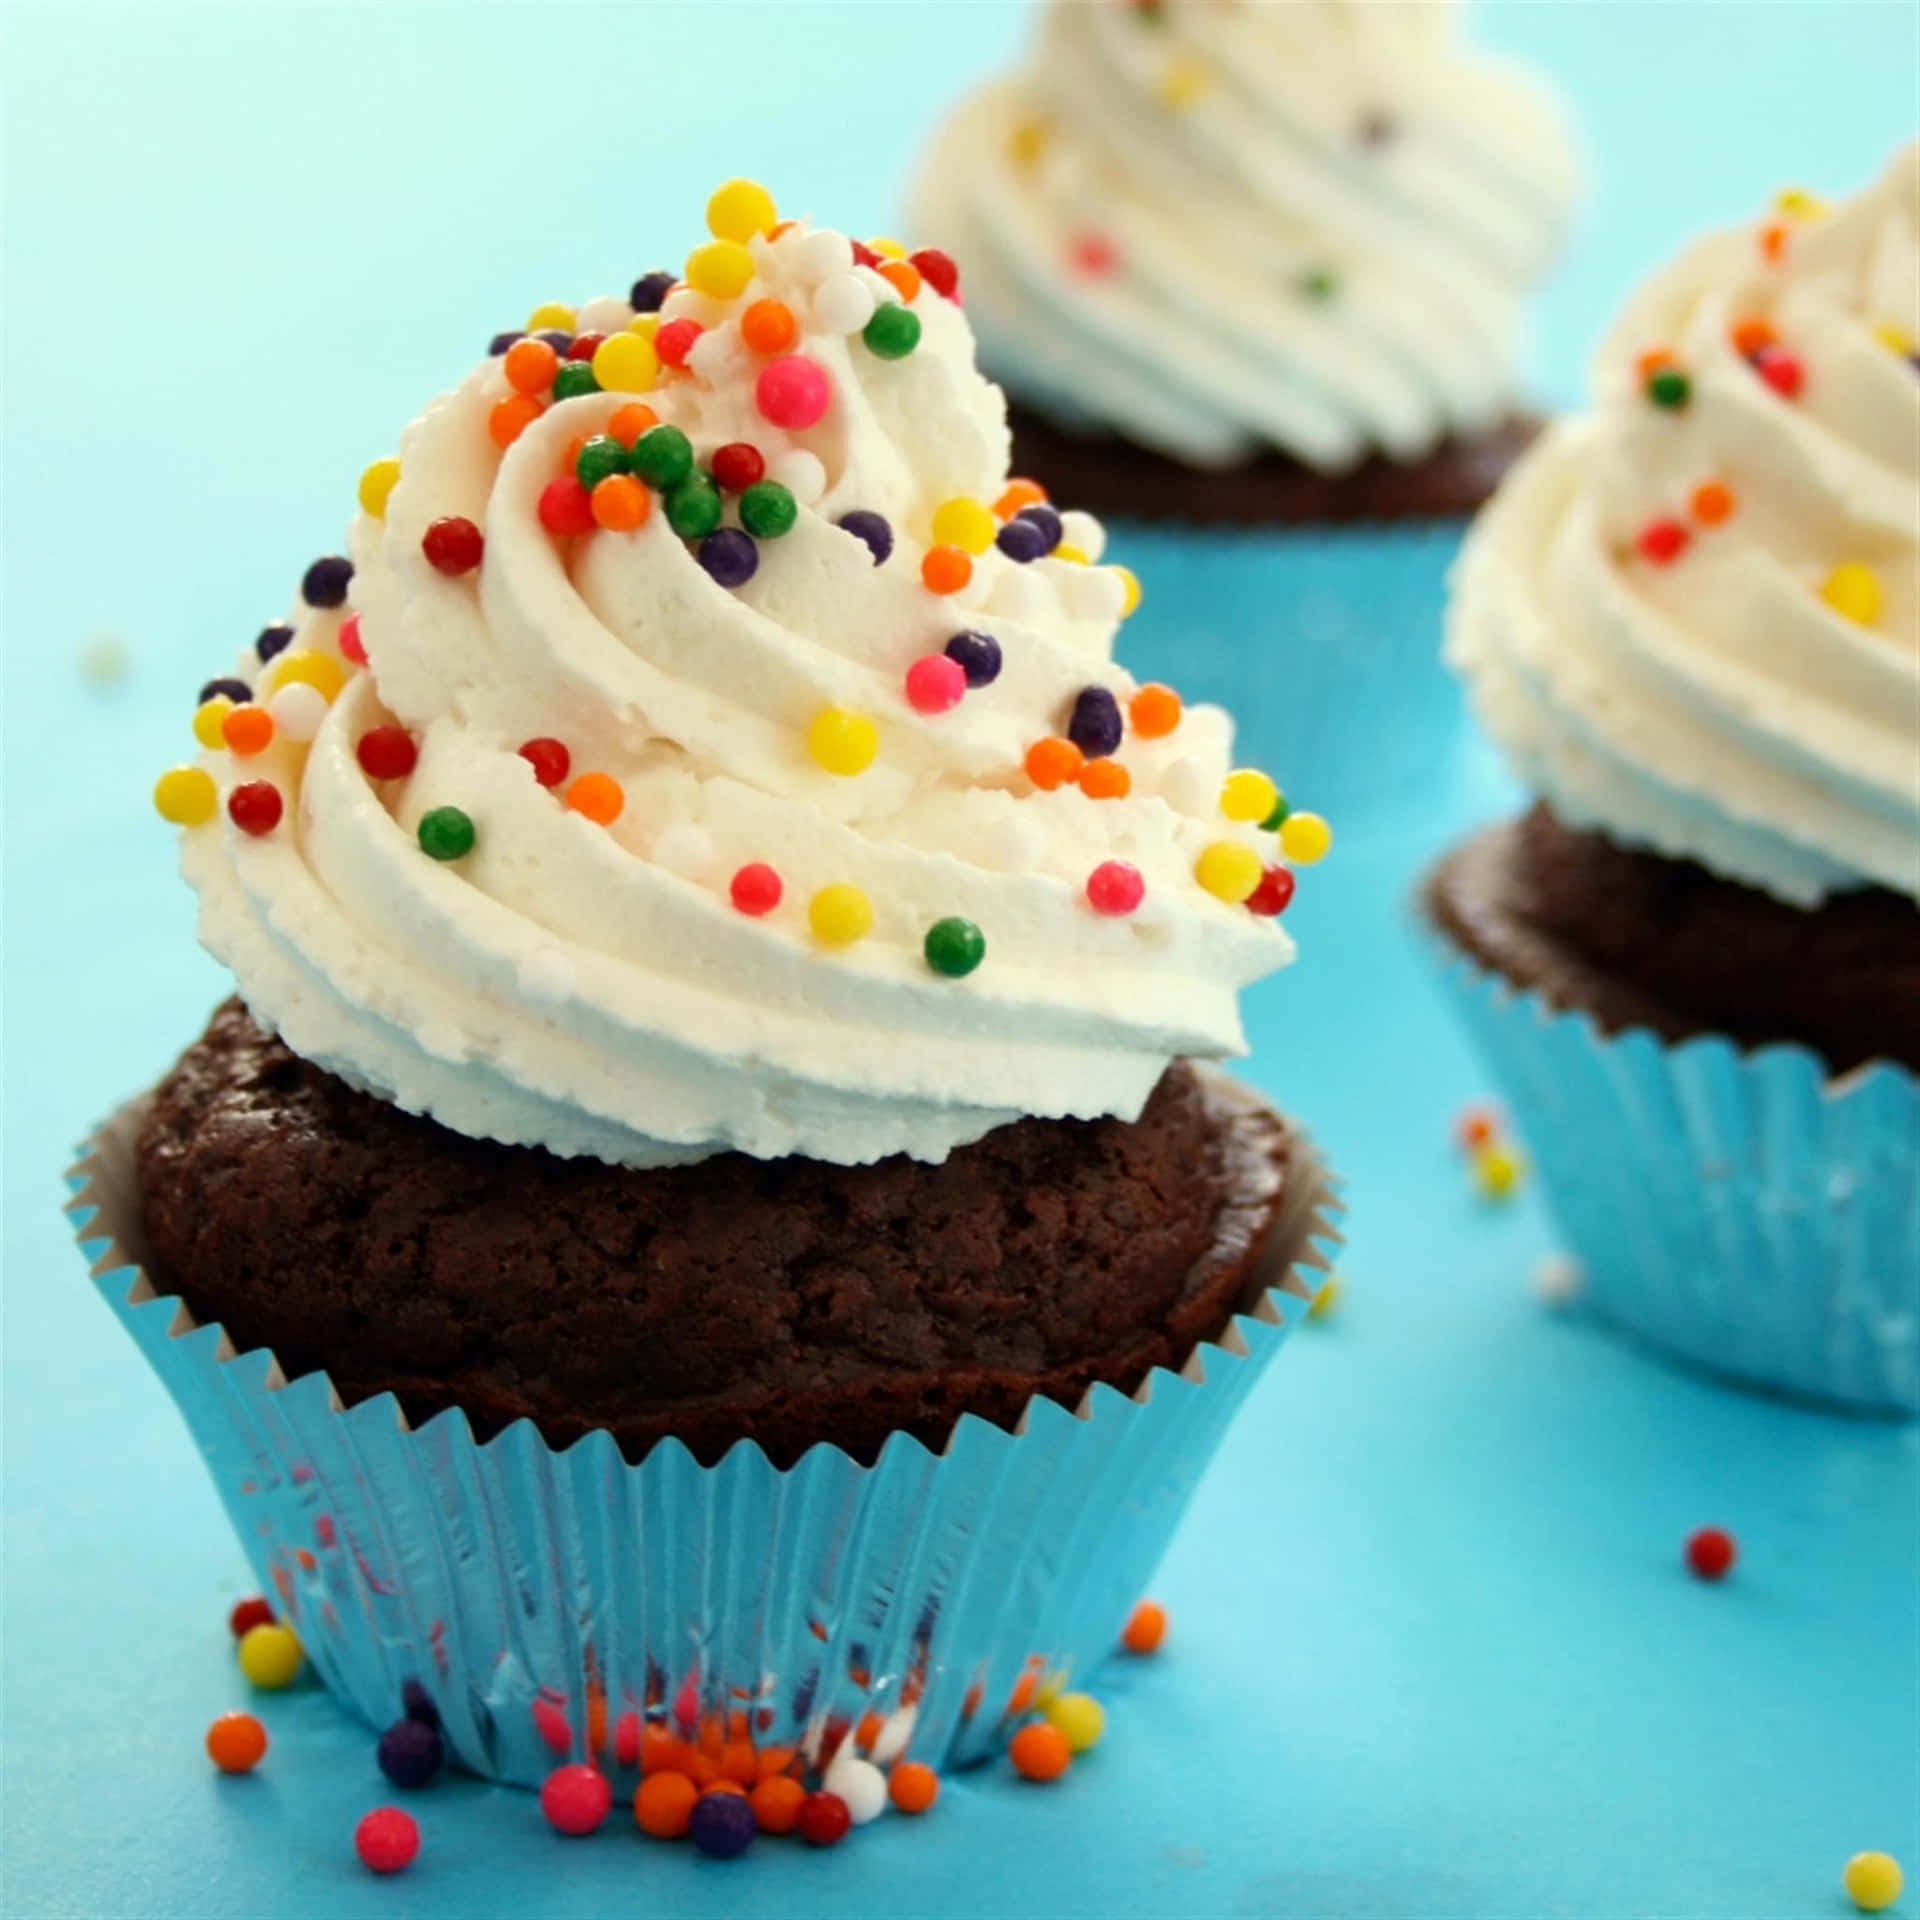 Yummy Cupcake With Cream And Sprinkles